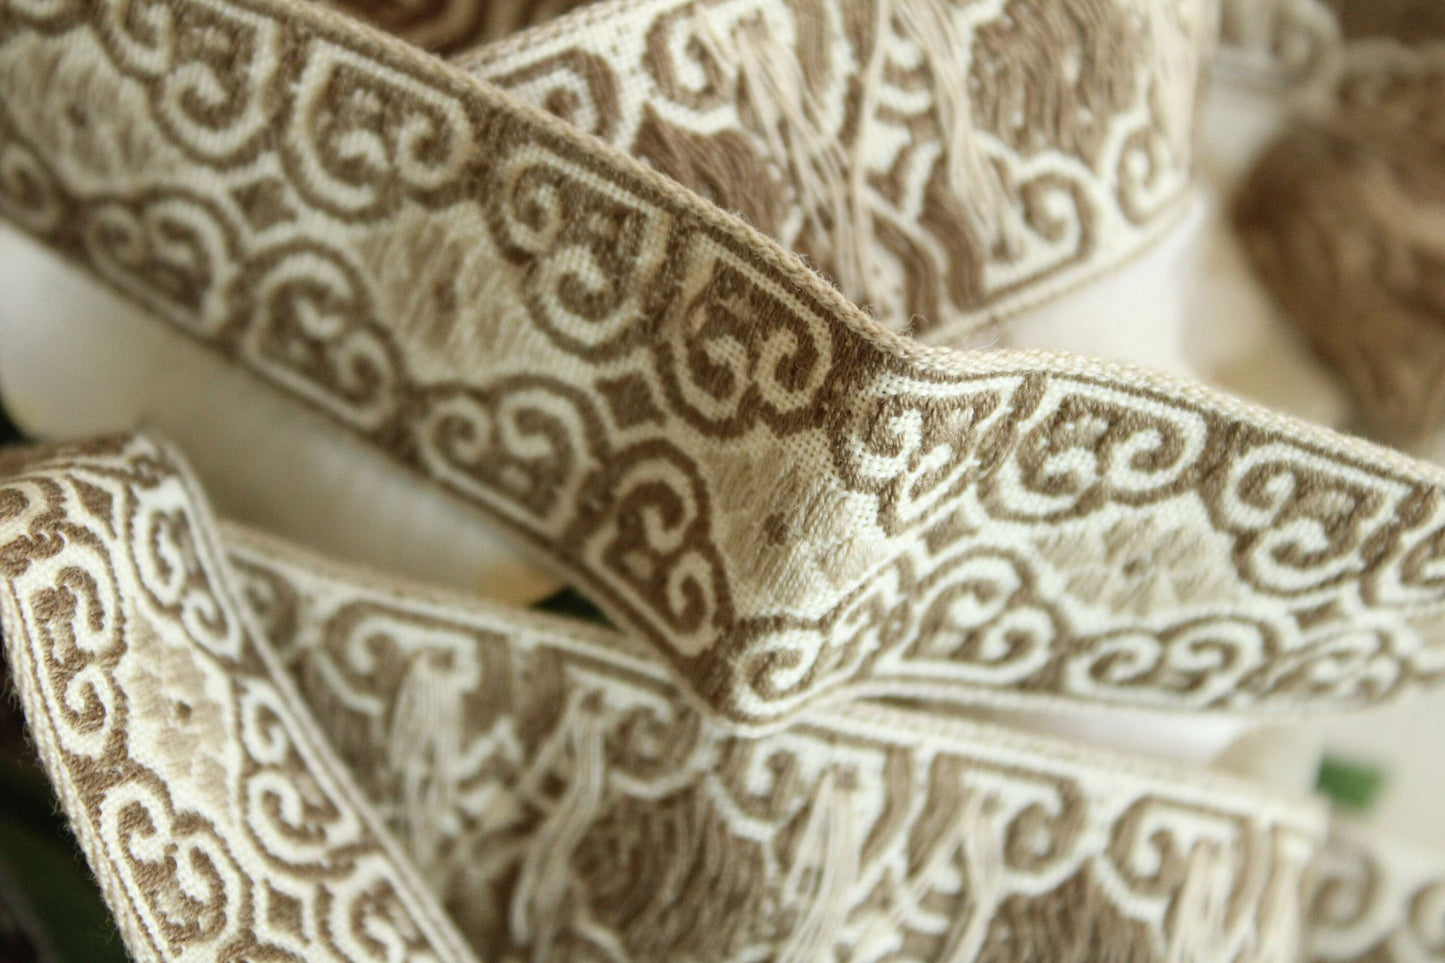 Vintage Jacquard Ribbon Trim, Tan And Ivory, 49" Long PIece, 1.25 Inch Wide